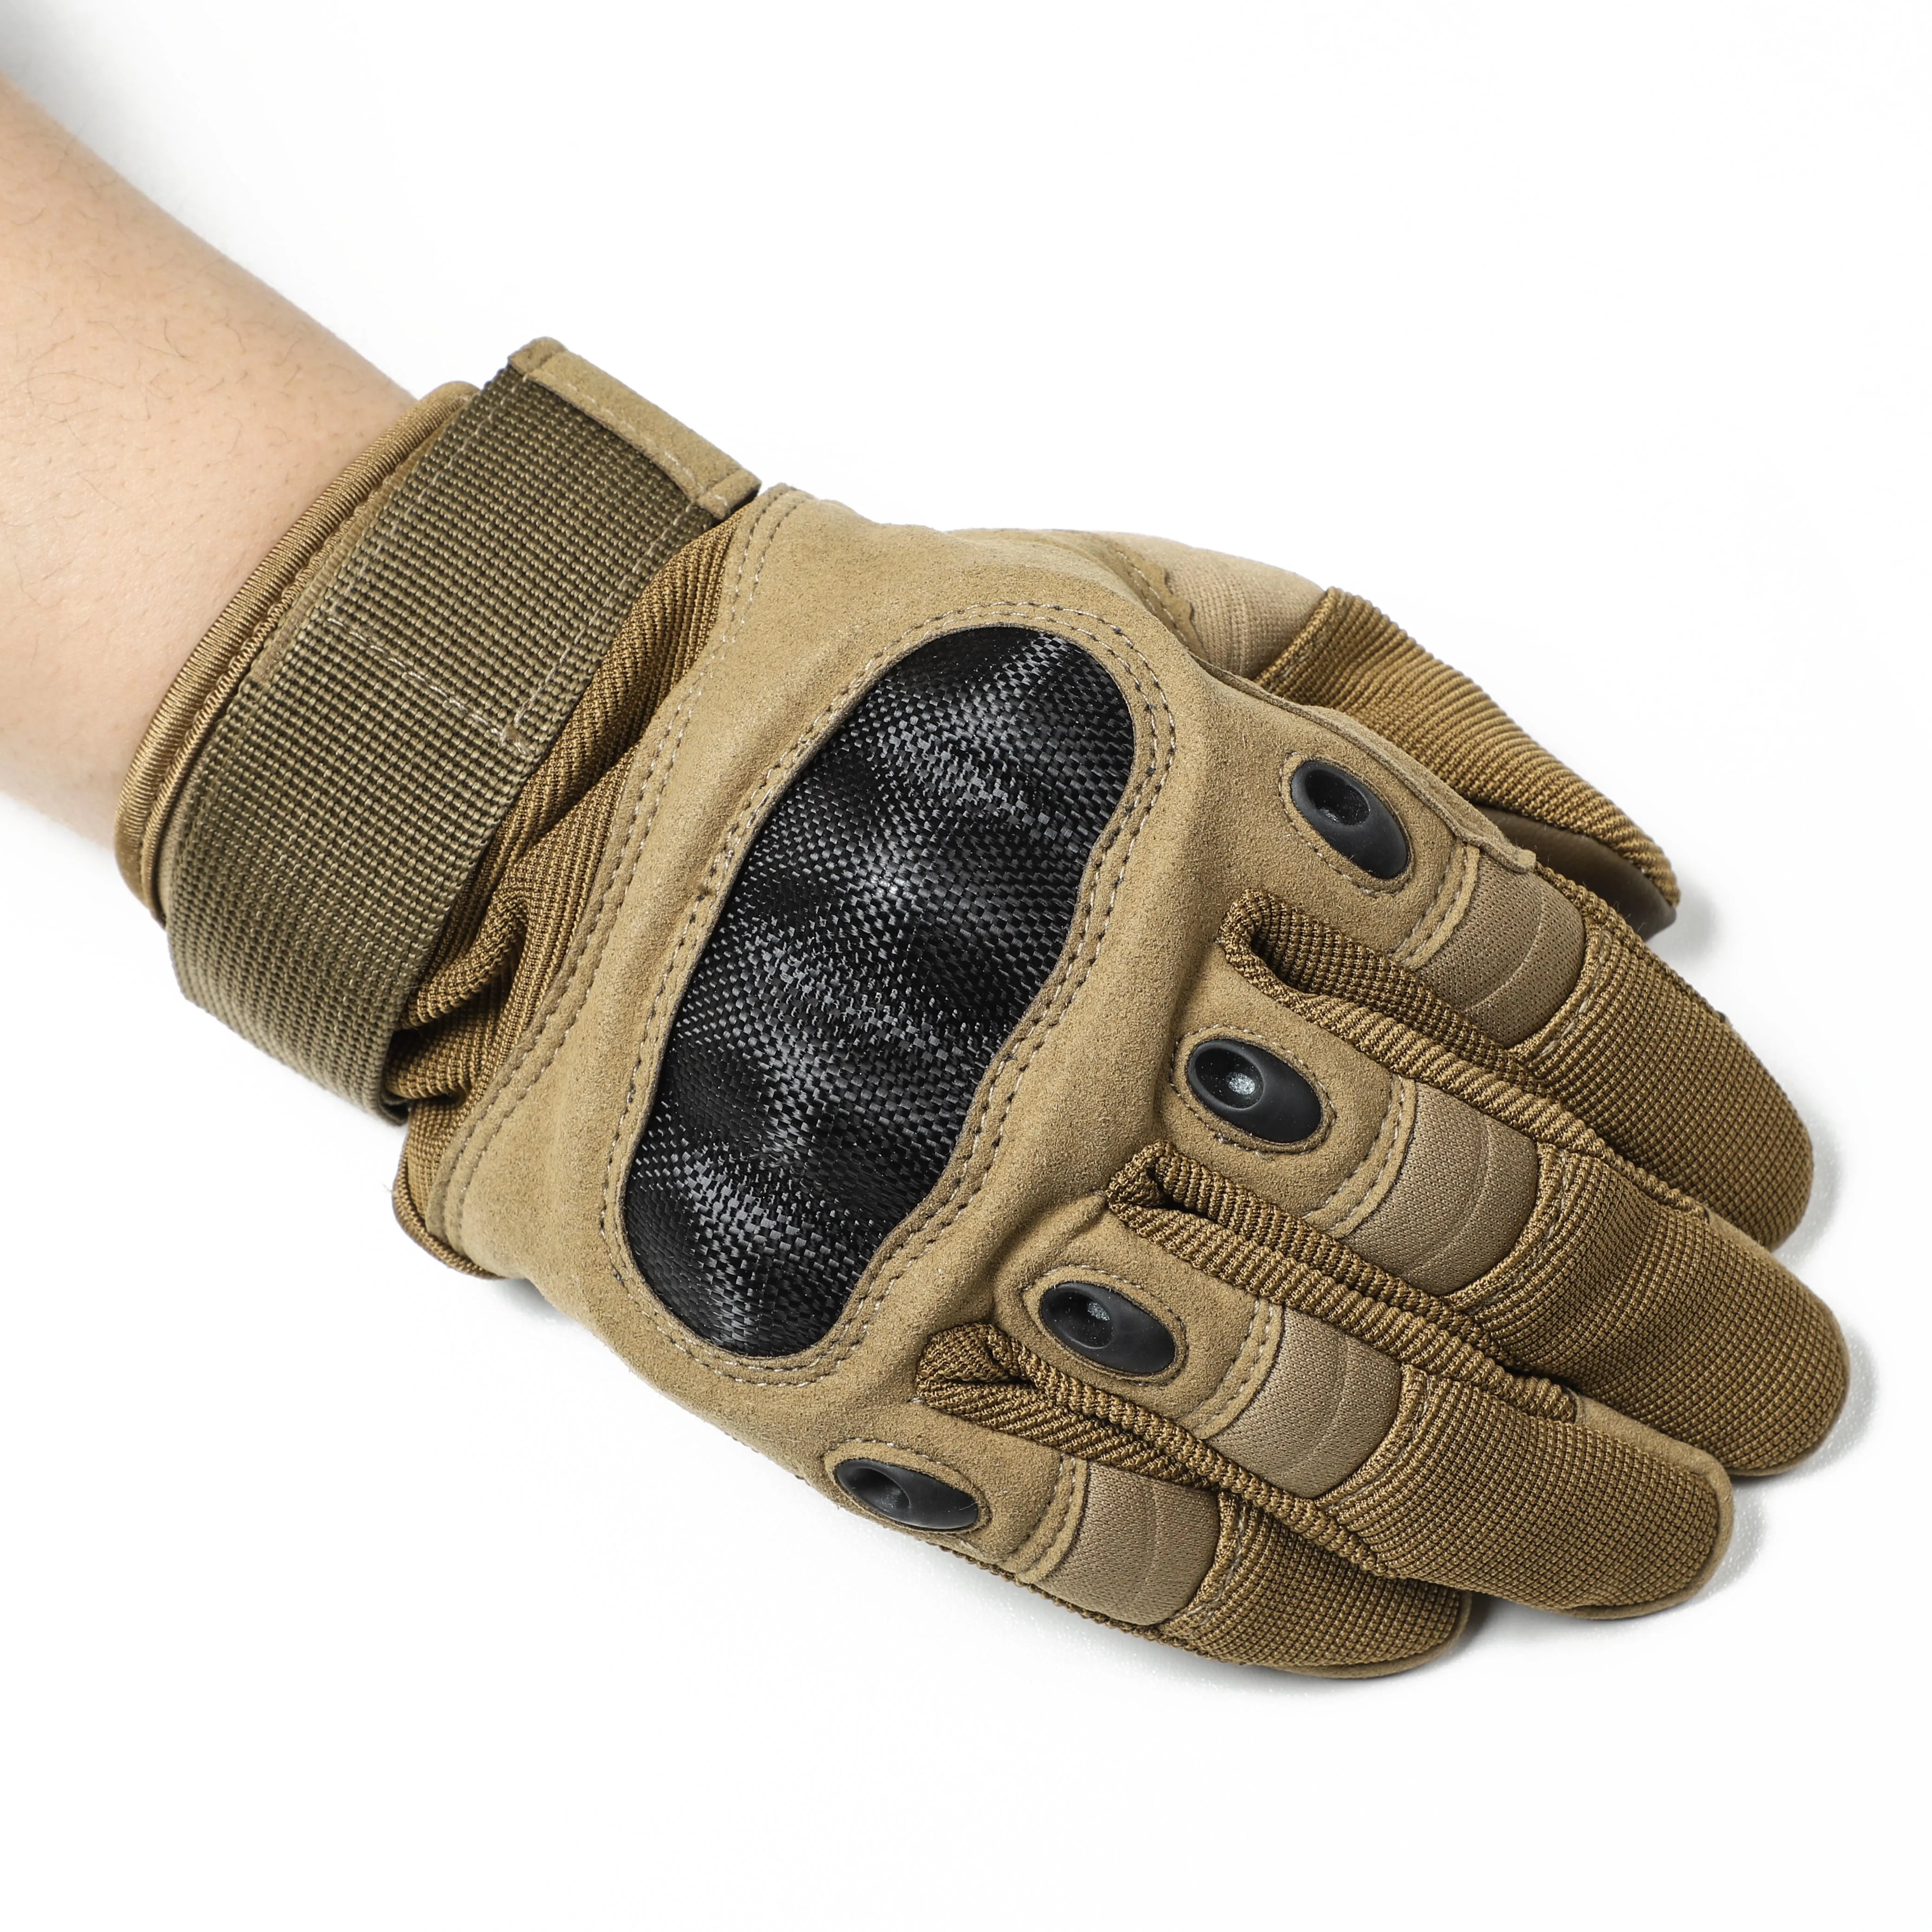 Protective Shock Resistant Winter Full Finger Combat Tactical Tactical Gloves